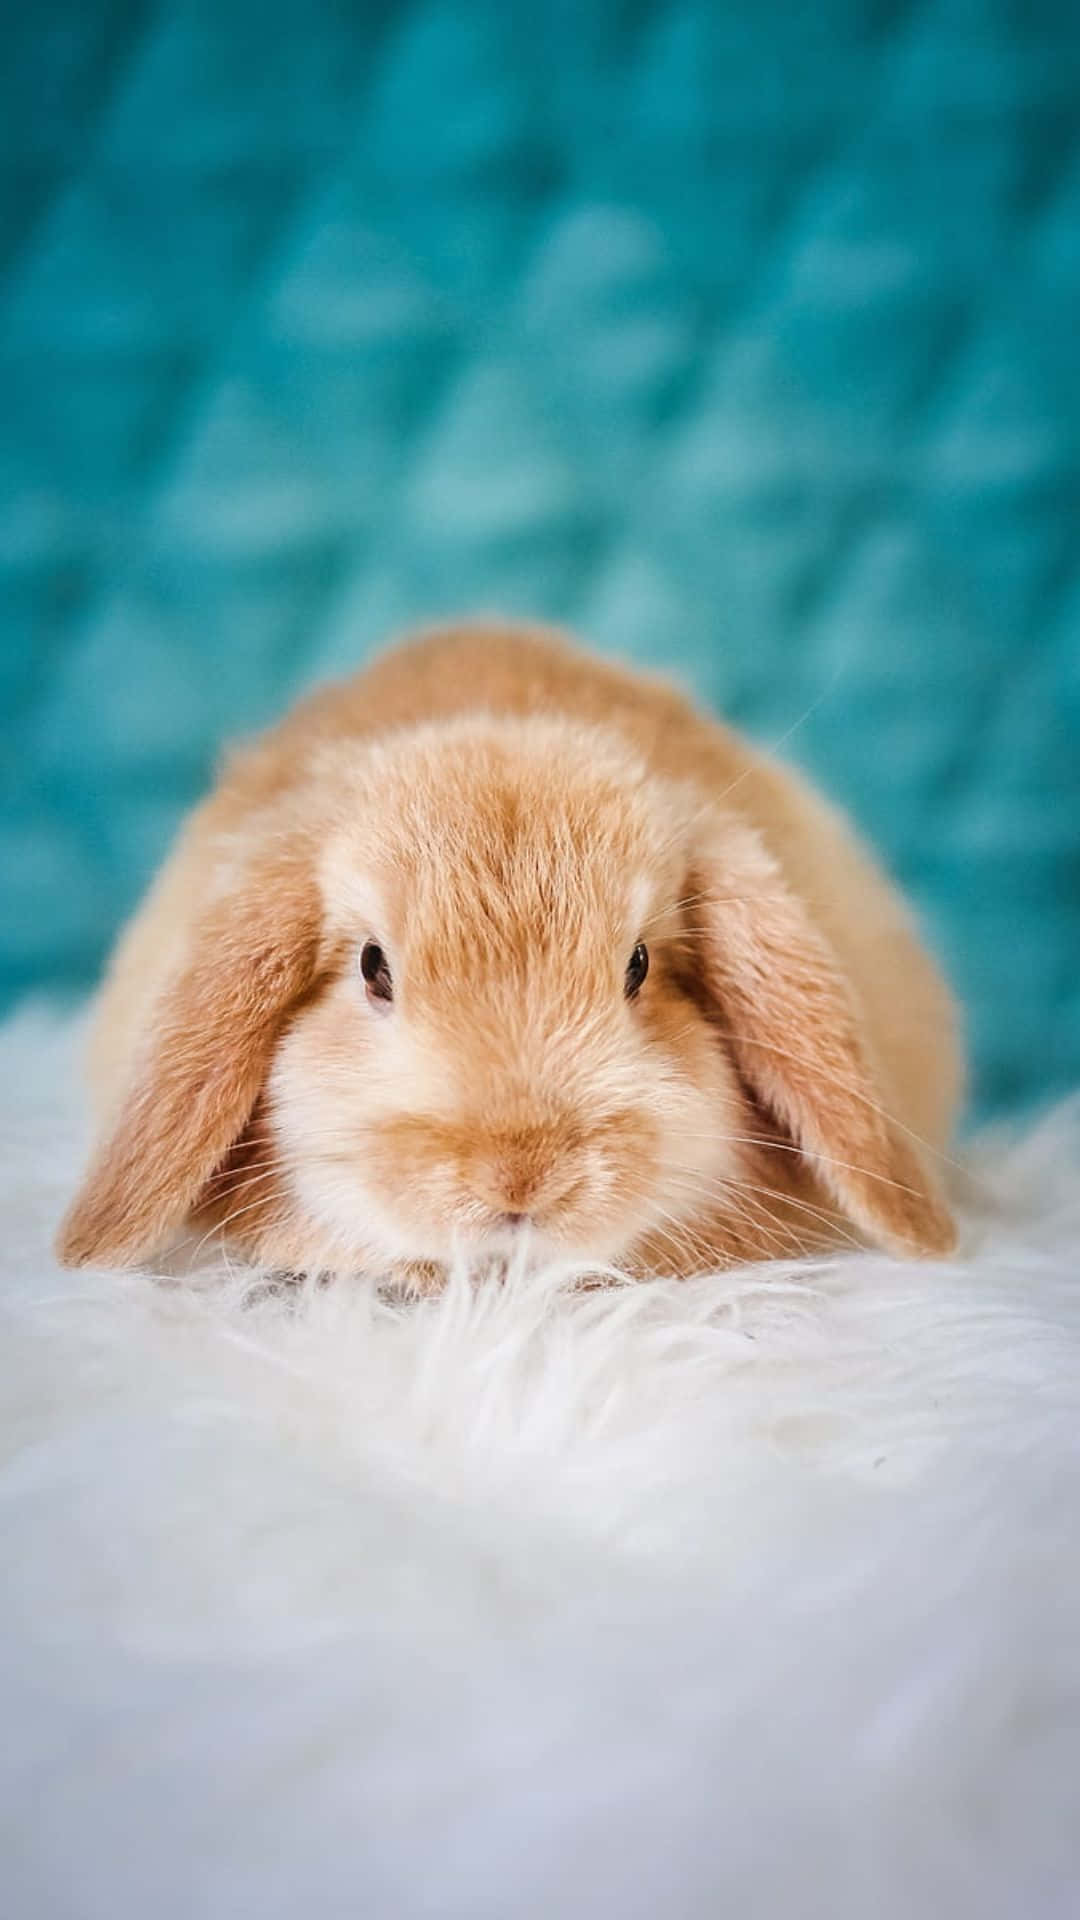 Unlock Your Cuteness with This Cute Bunny iPhone Wallpaper